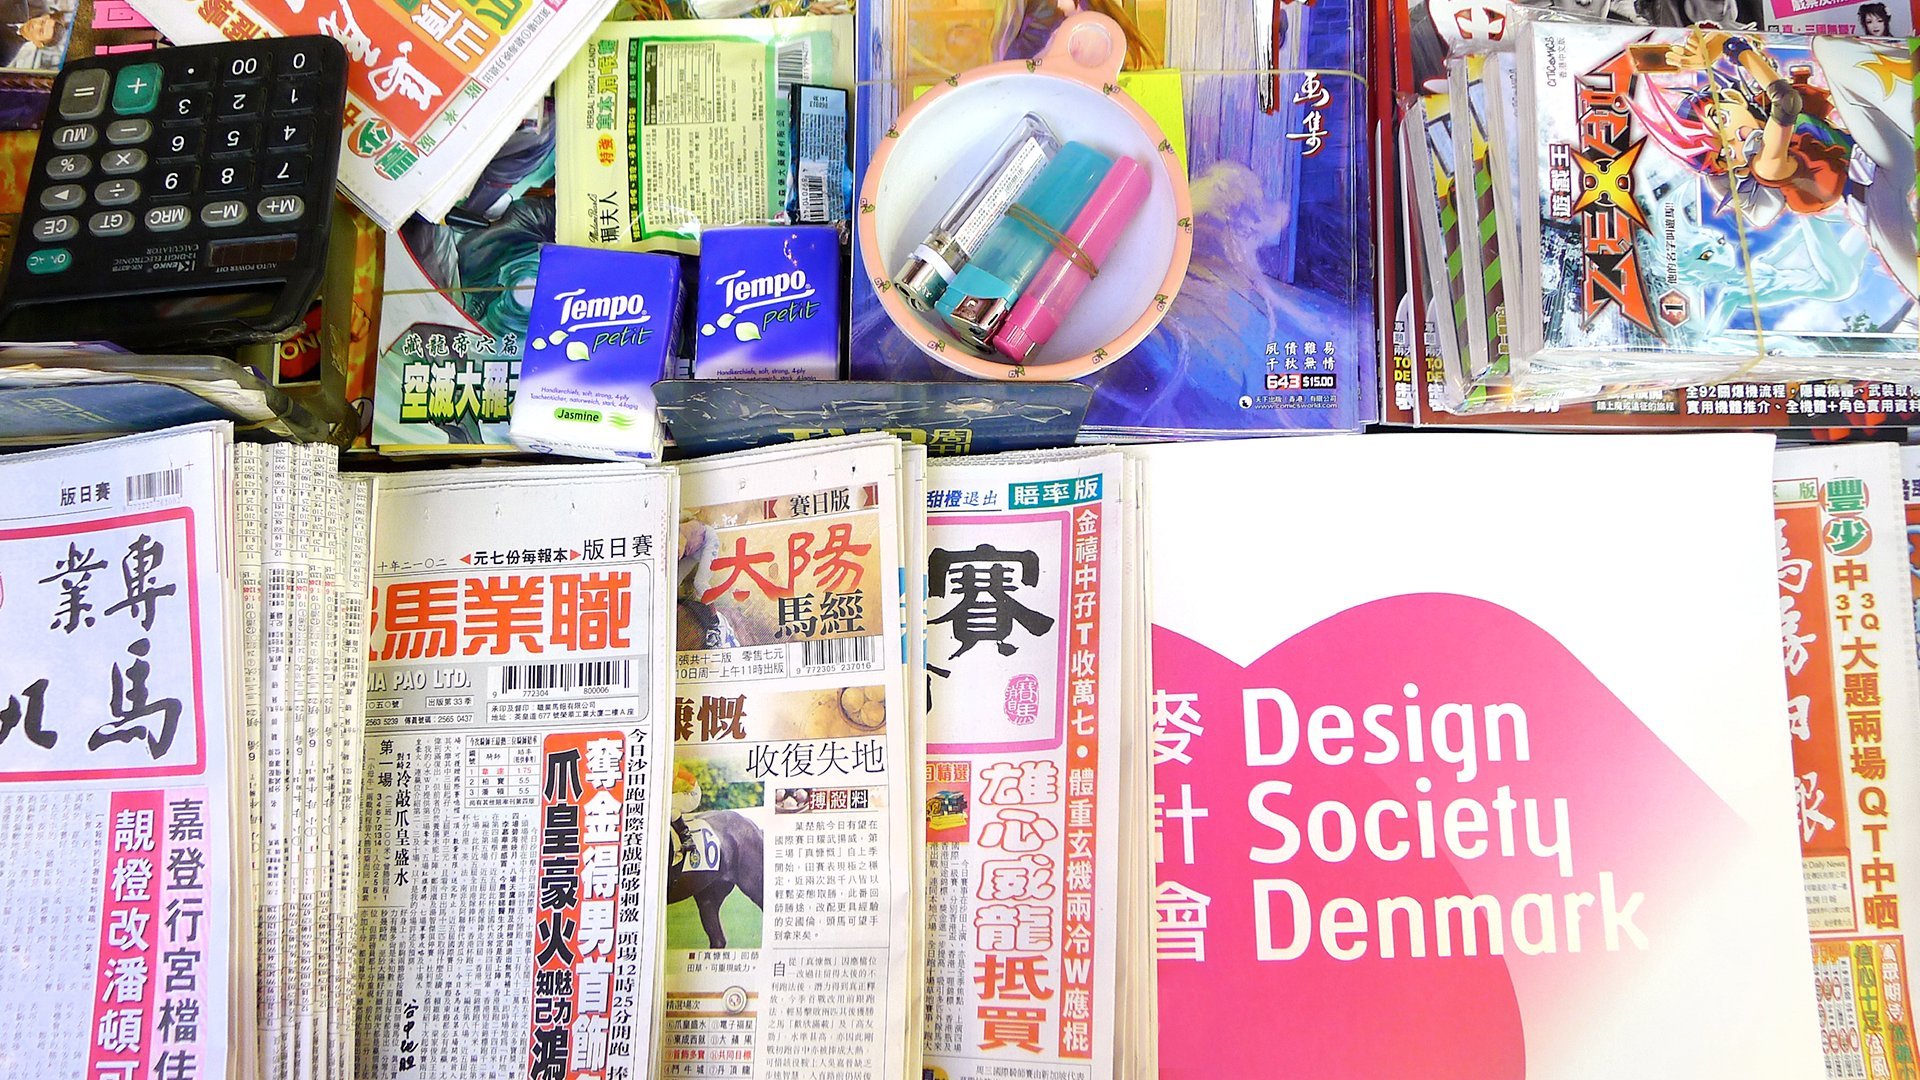 Design Society Denmark catalogue by LOOP Associates amongst other magazines in Hong Kong kiosk